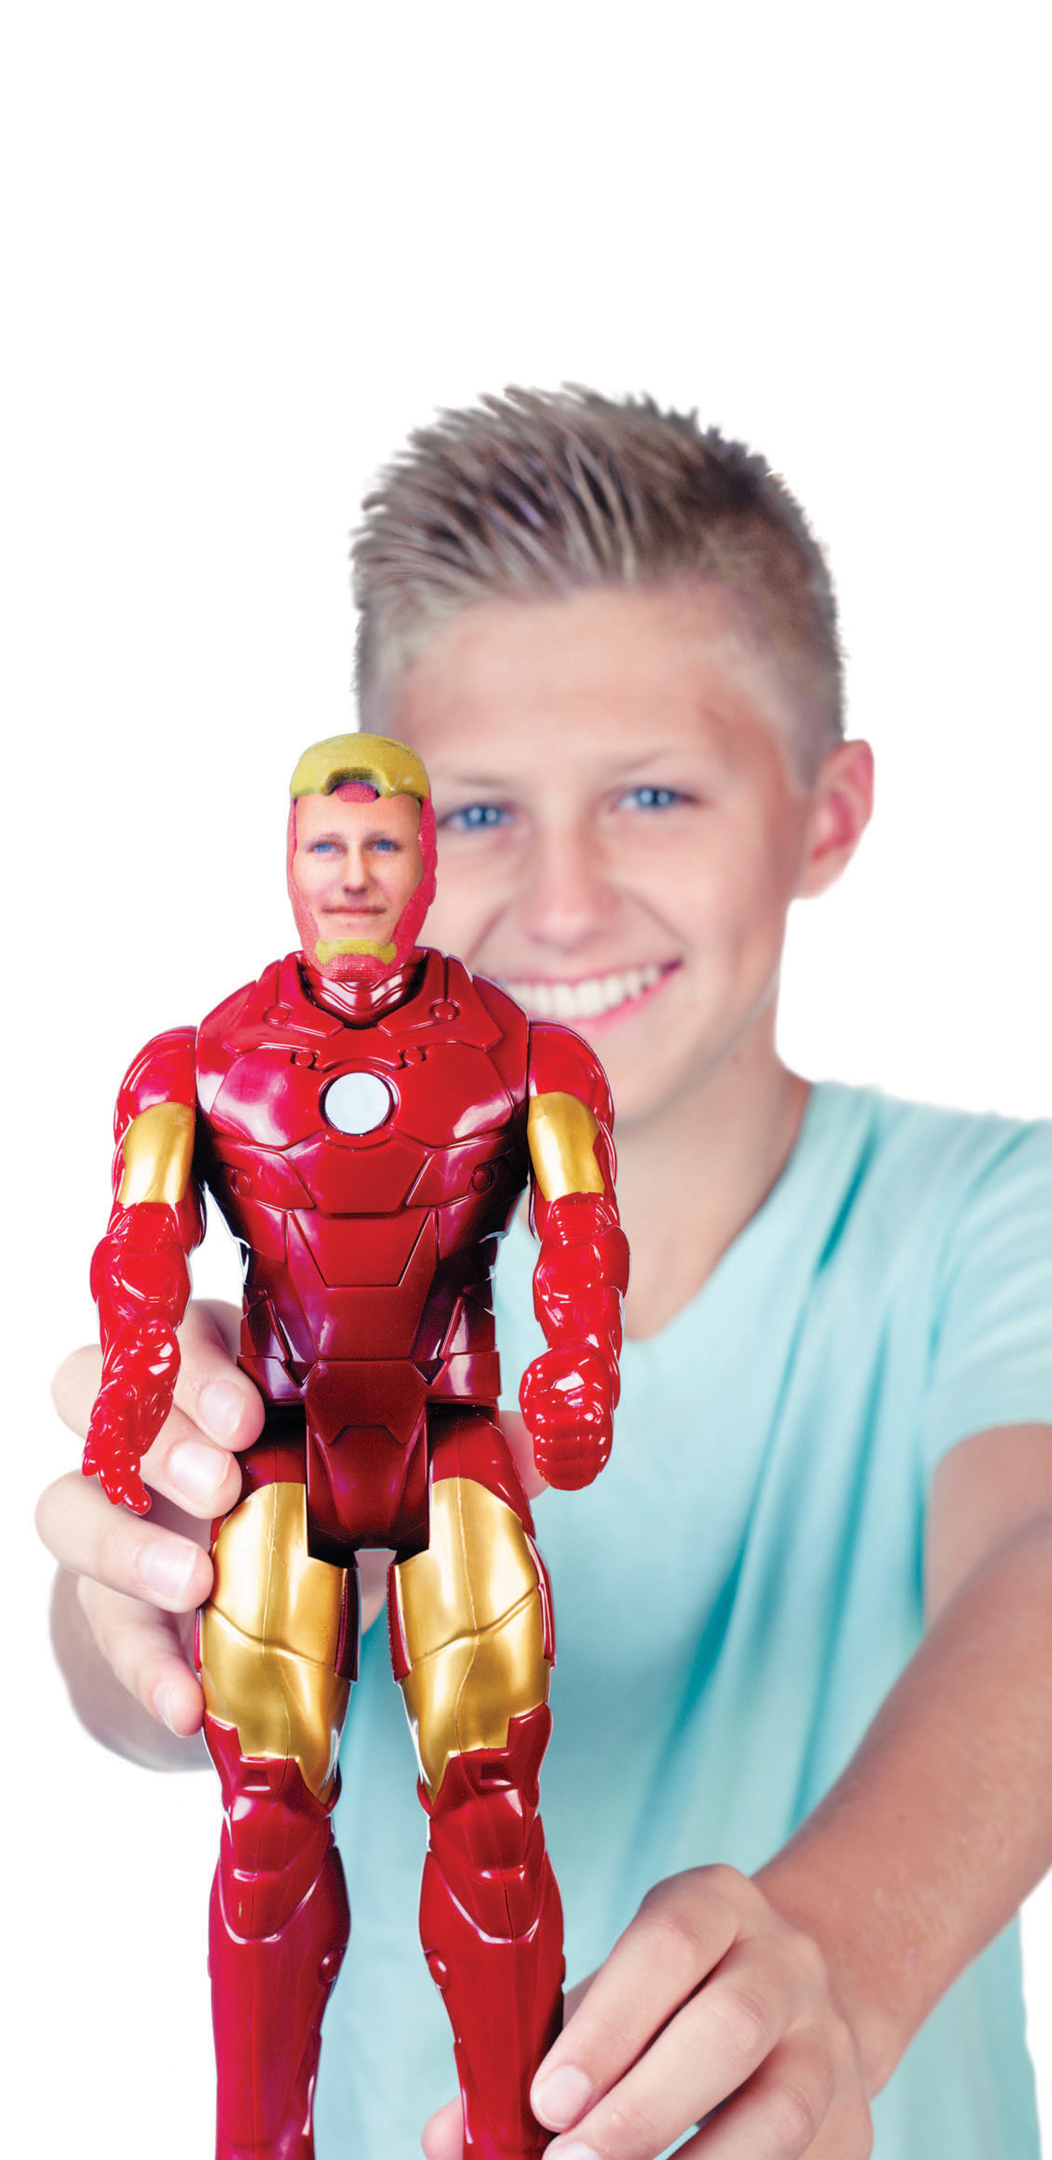 SUPER AWESOME ME 3D printed iron man action figure